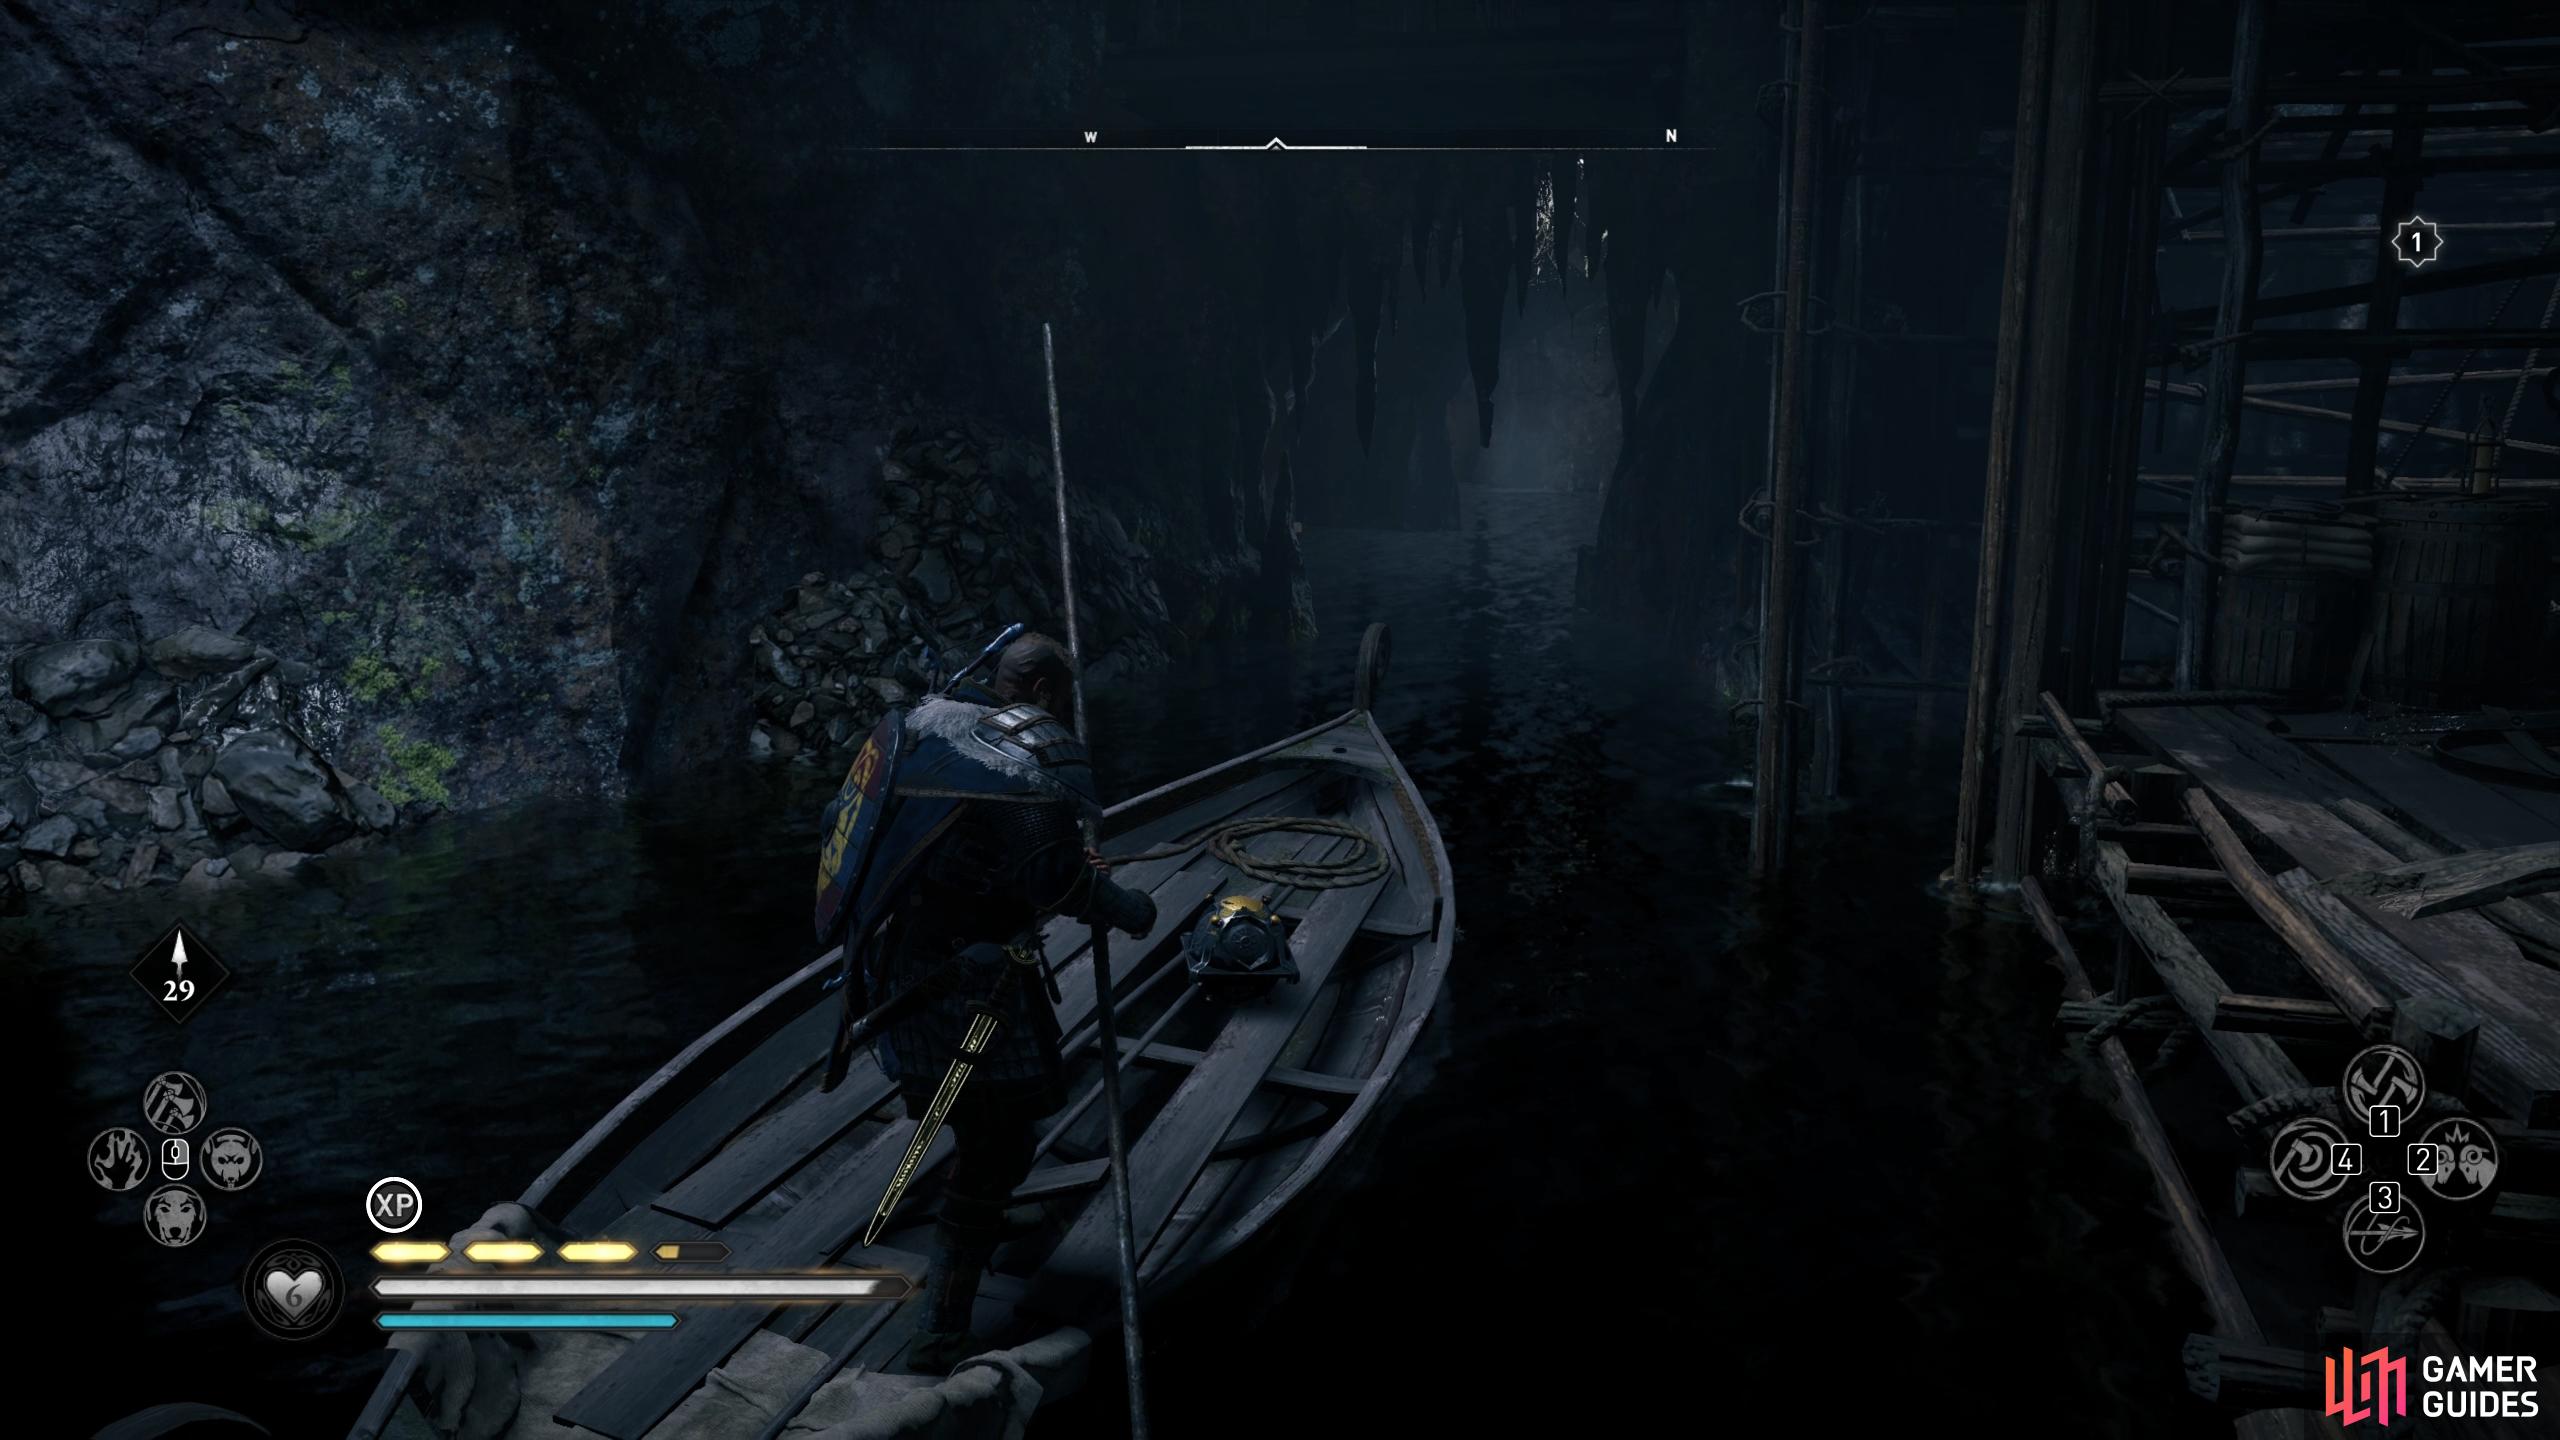 Carry the spherical object to the boat and make your way back to the main chamber.